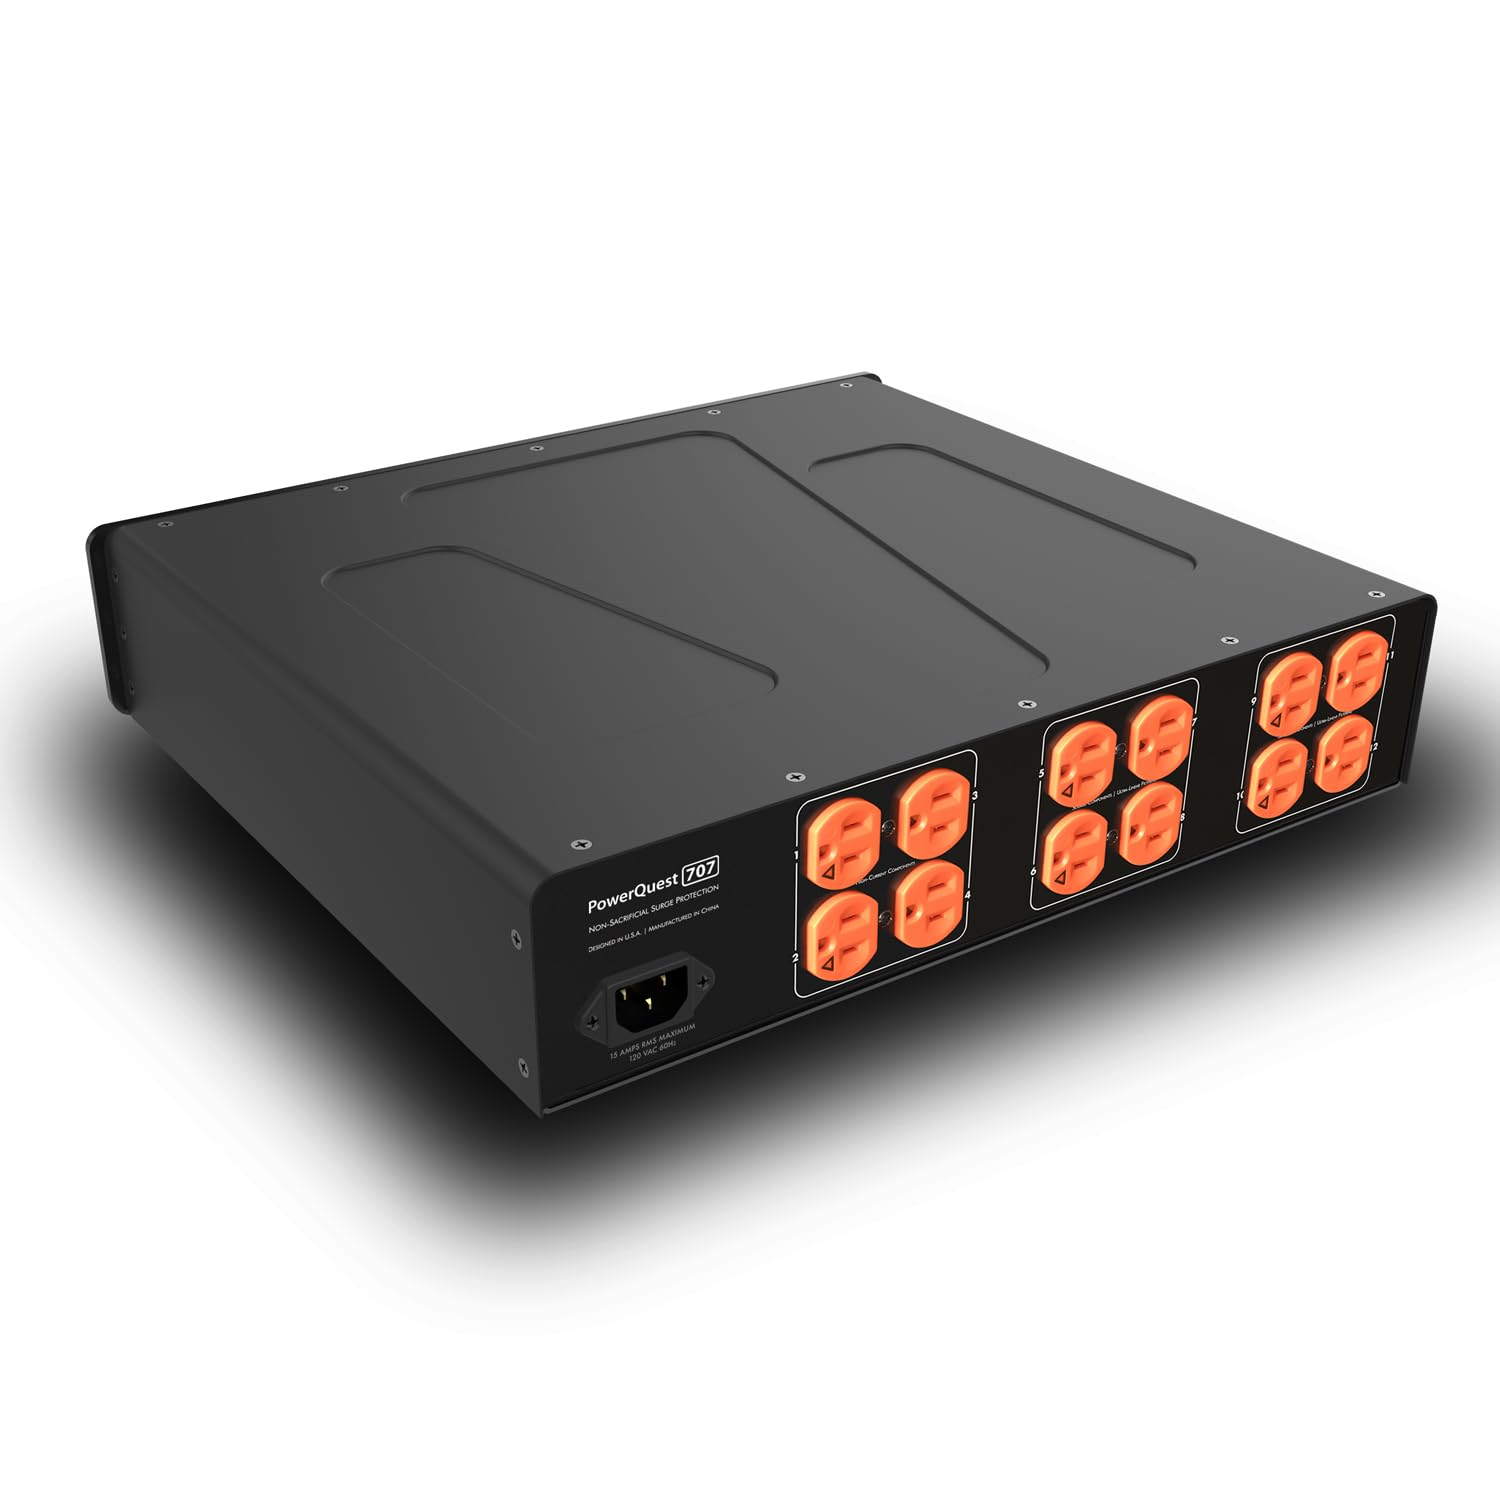 AudioQuest - PowerQuest 707 High-Performance Power Conditioner with 12 AC outlets, 2m Detachable AC Power Cable, and 2RU Rack Ears. Perfect for TV, AV Receiver, Xbox, Playstation, Soundbar